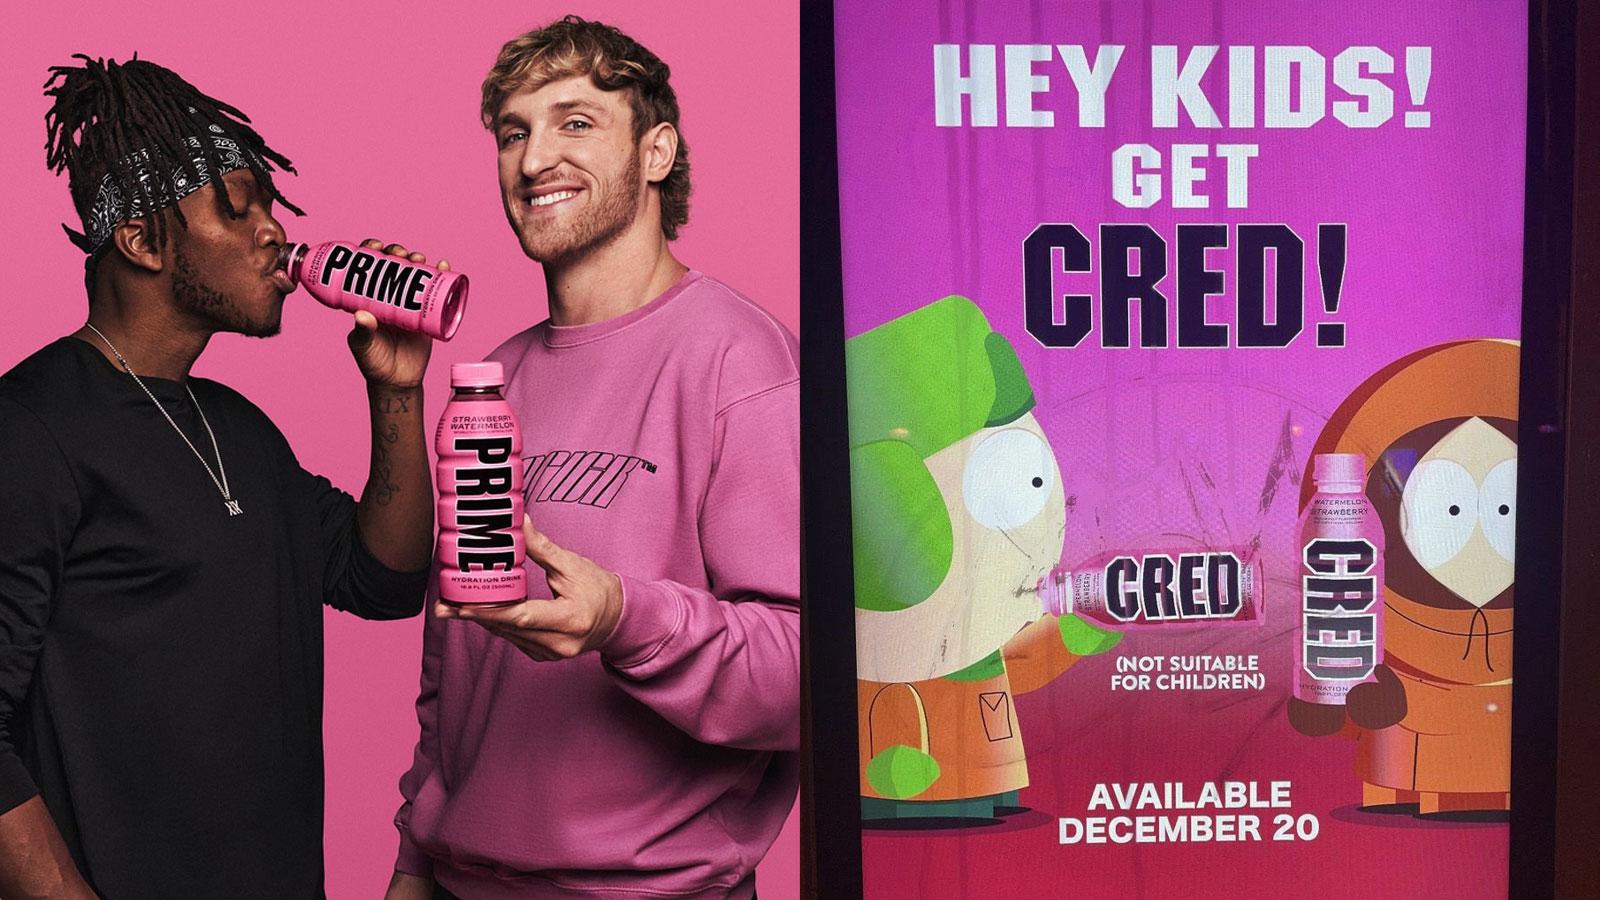 KSI and Logan Paul with Prime Strawberry Watermelon bottle next to South Park Prime parody ad